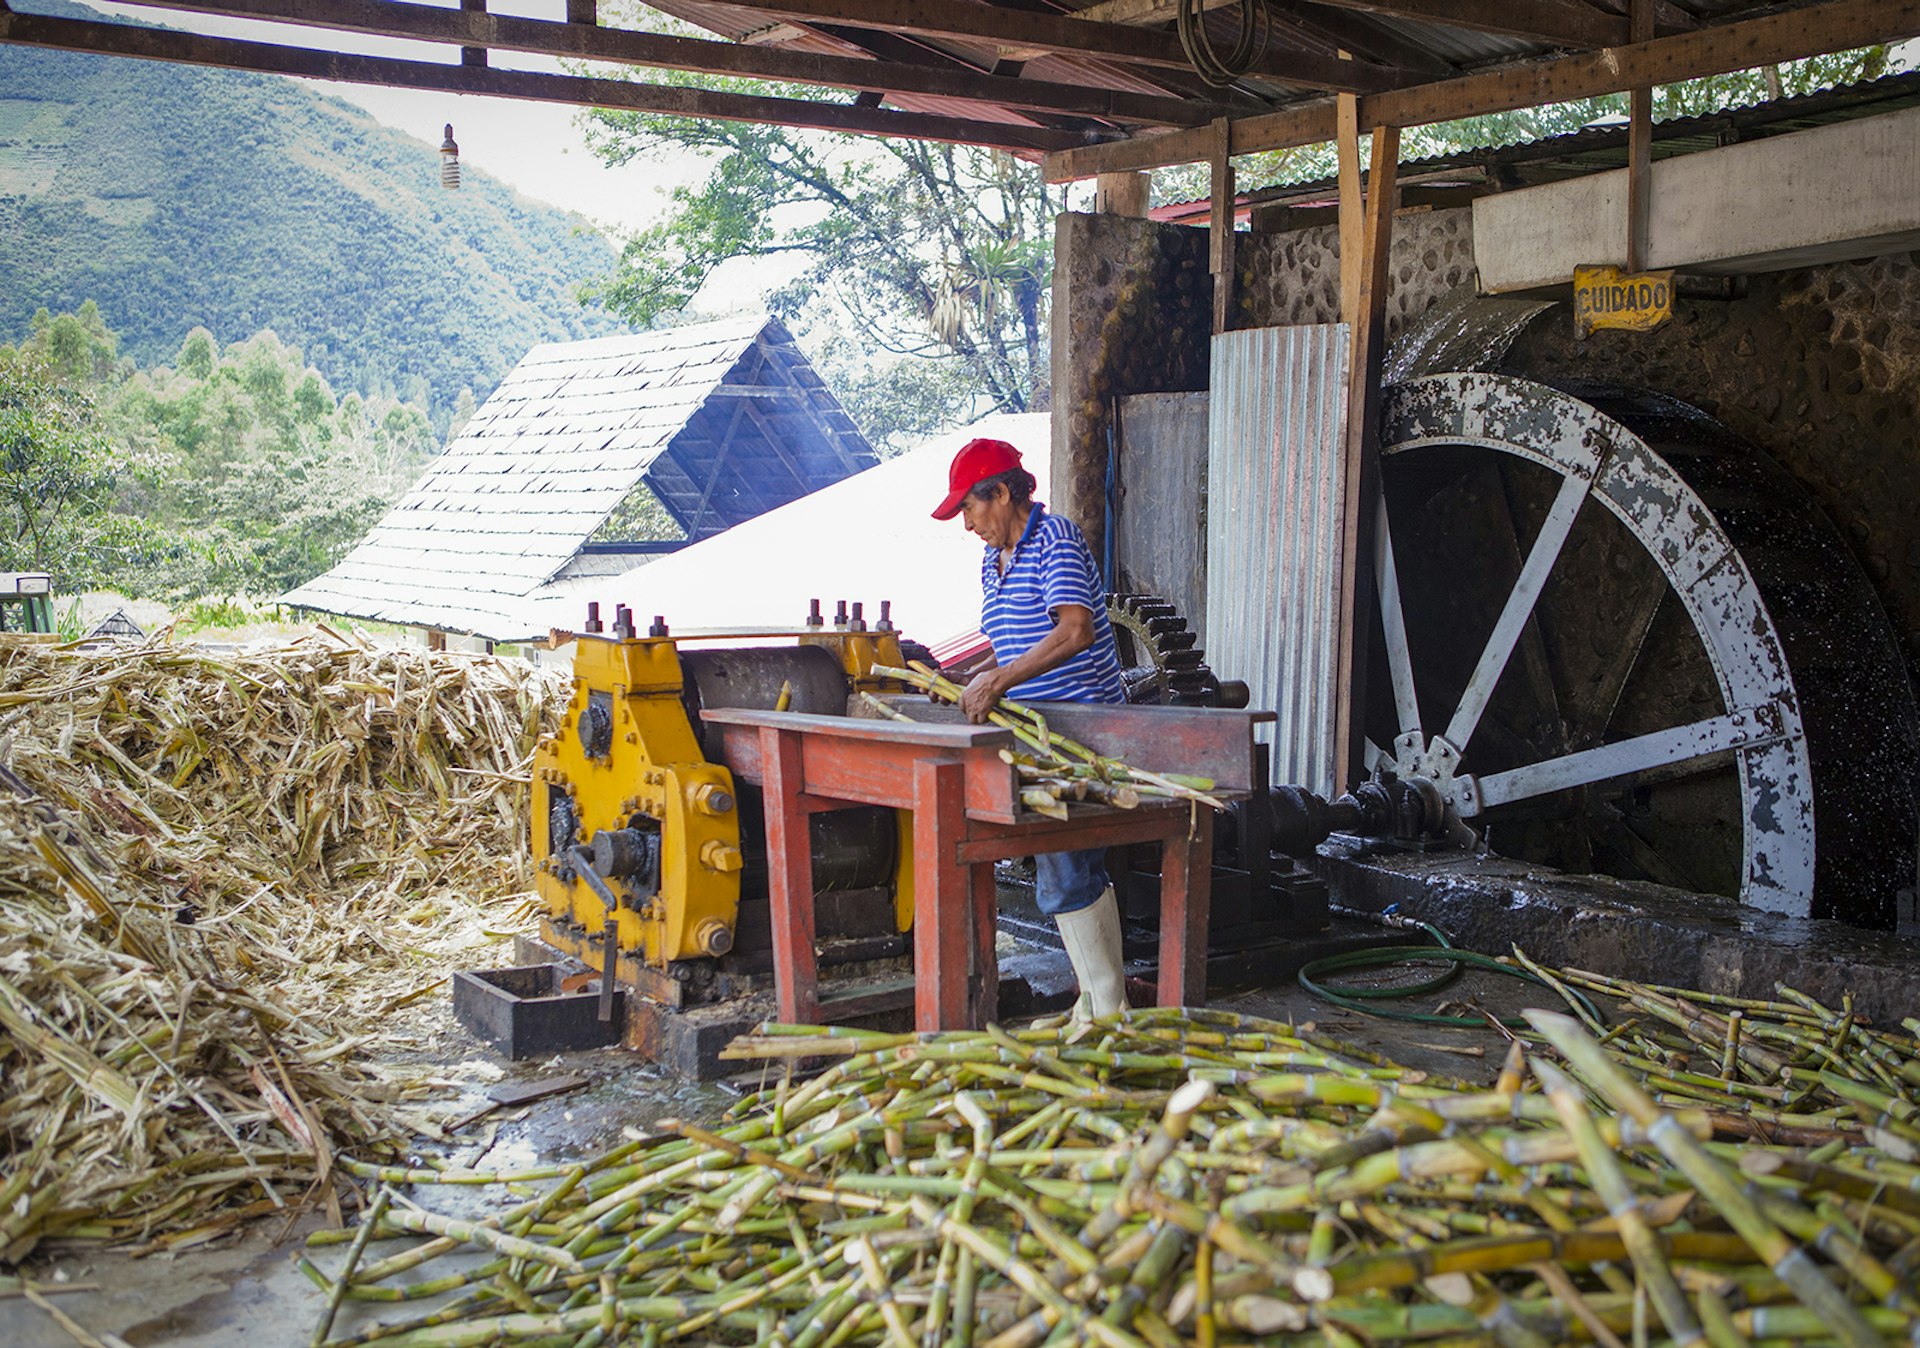 A man uses a sugarcane press surrounded by sugarcane stalks © Erick Andía / Lonely Planet